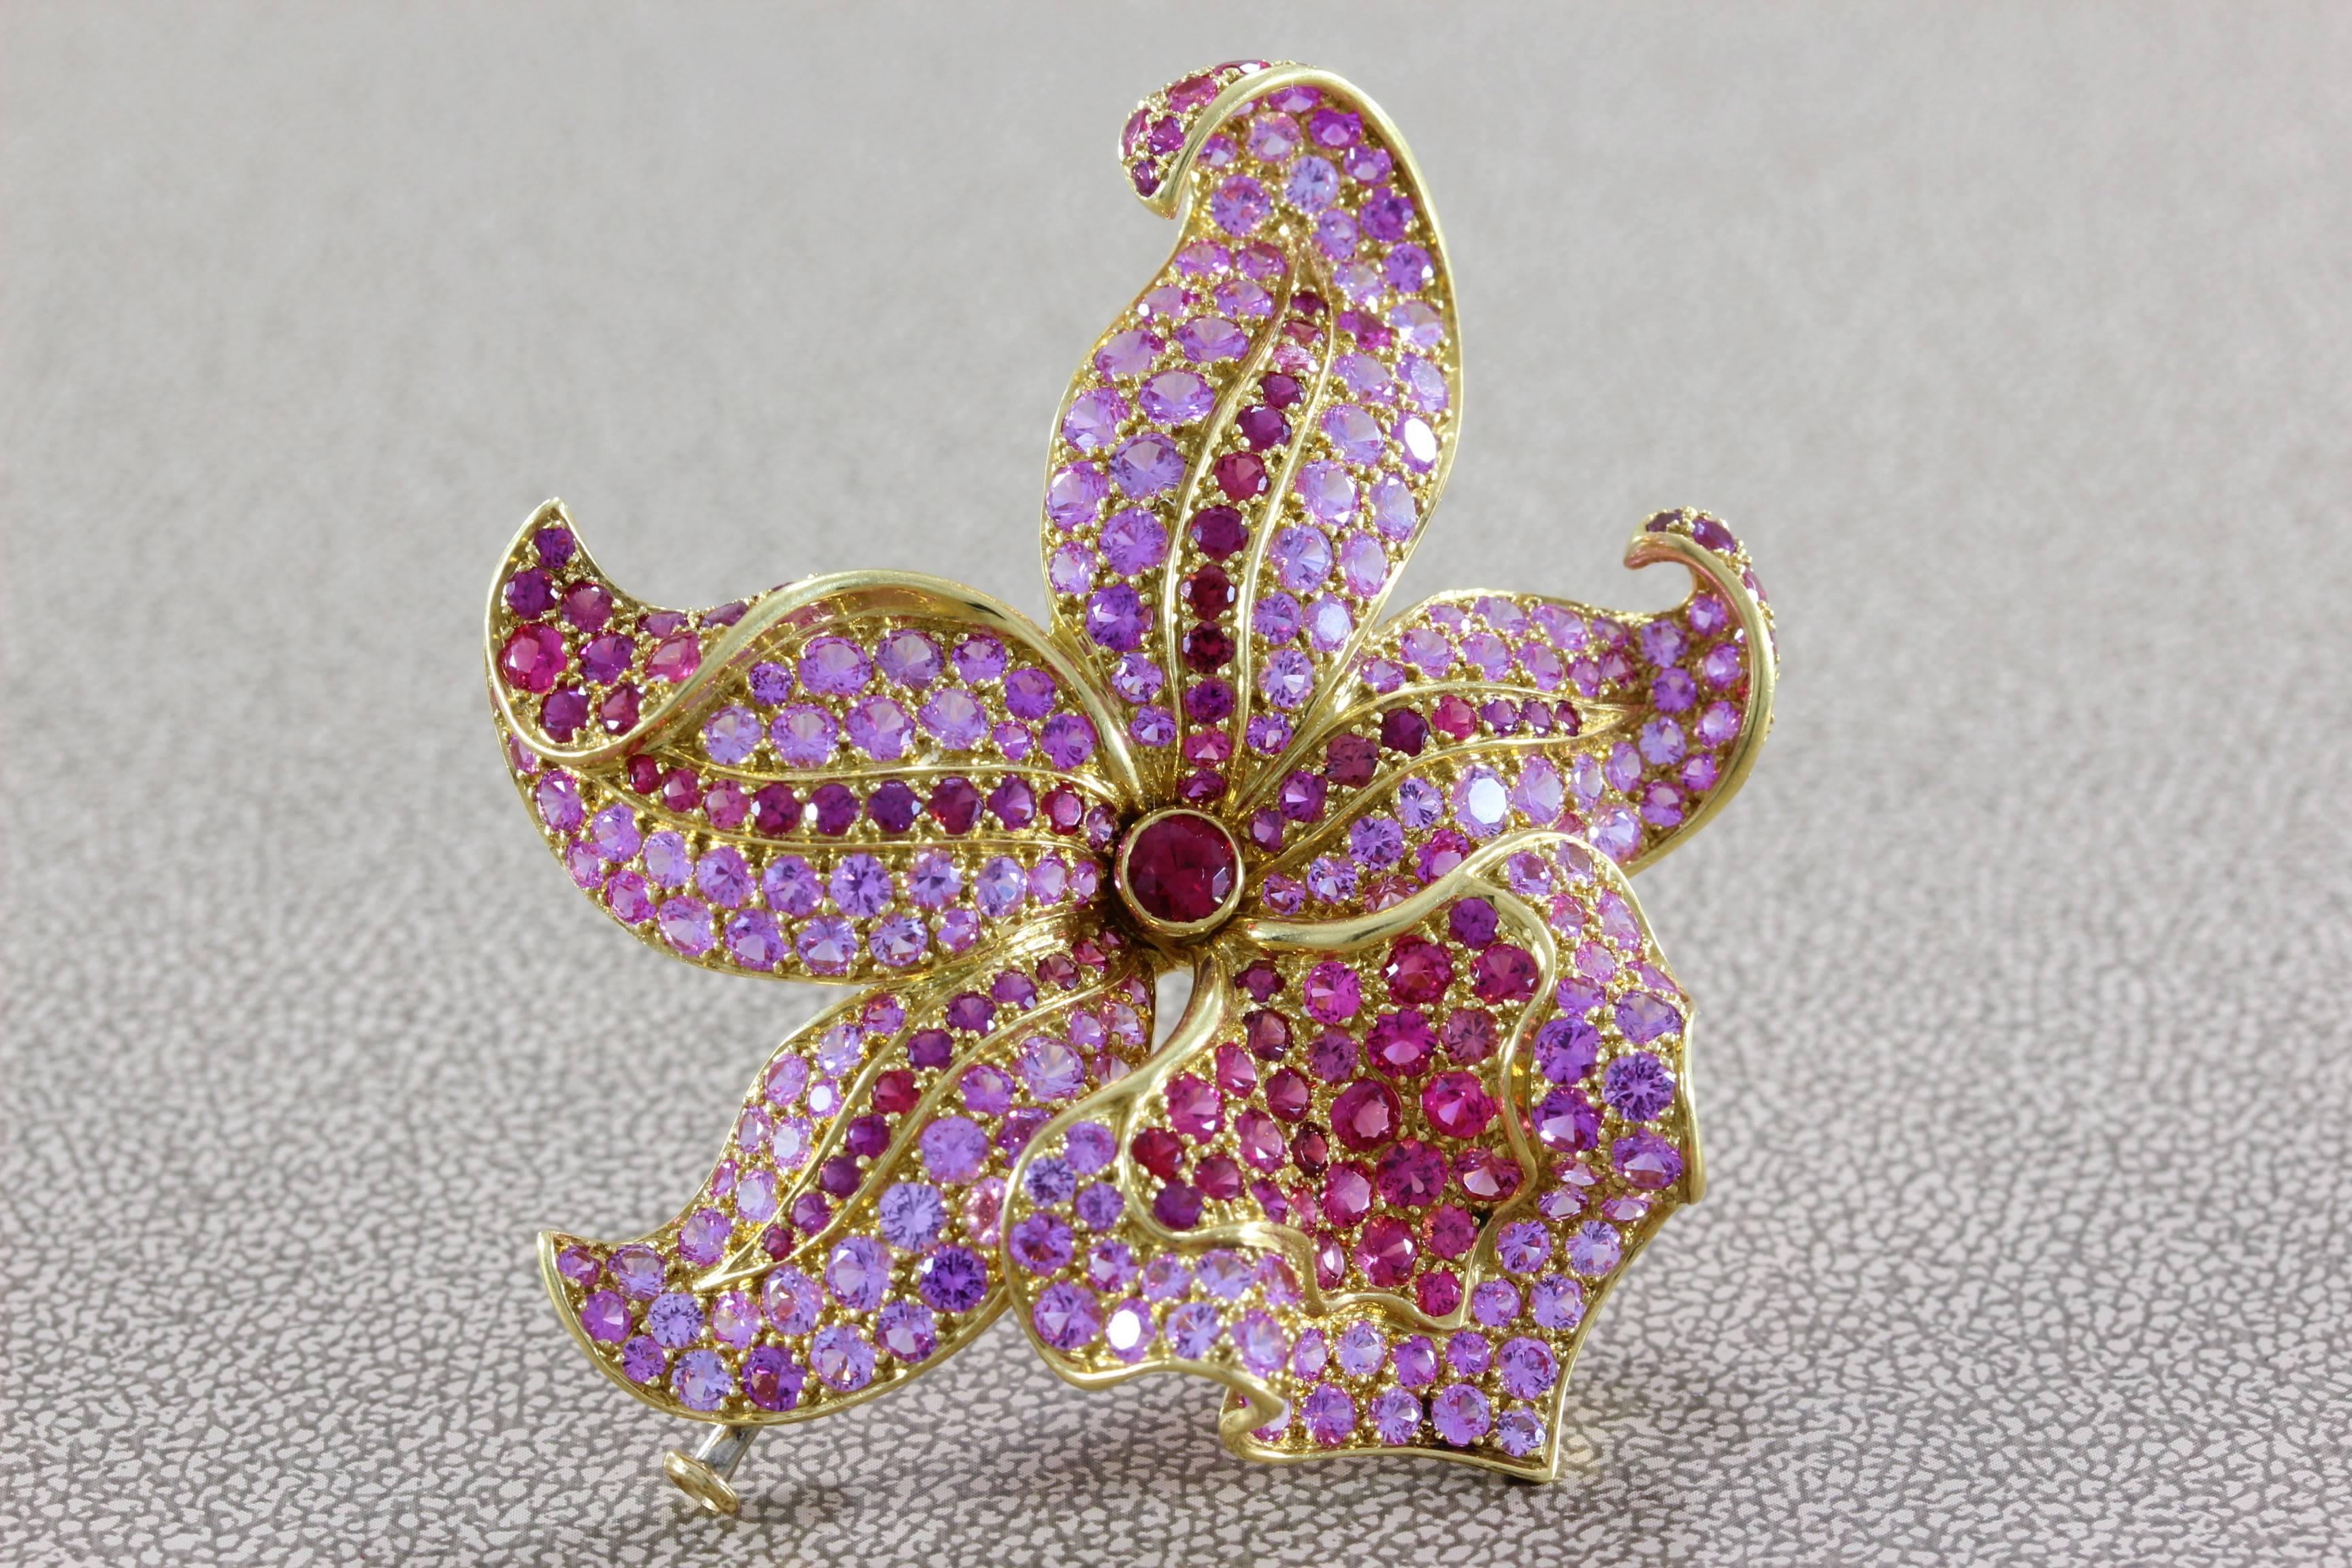 A Tiffany & Co. original, this beautiful French made brooch features over 7 carats of pink sapphire and 3 carats of vivid red spinel which rival the finest of rubies. Set in 18K yellow gold, the quality and workmanship expected from the Tiffany